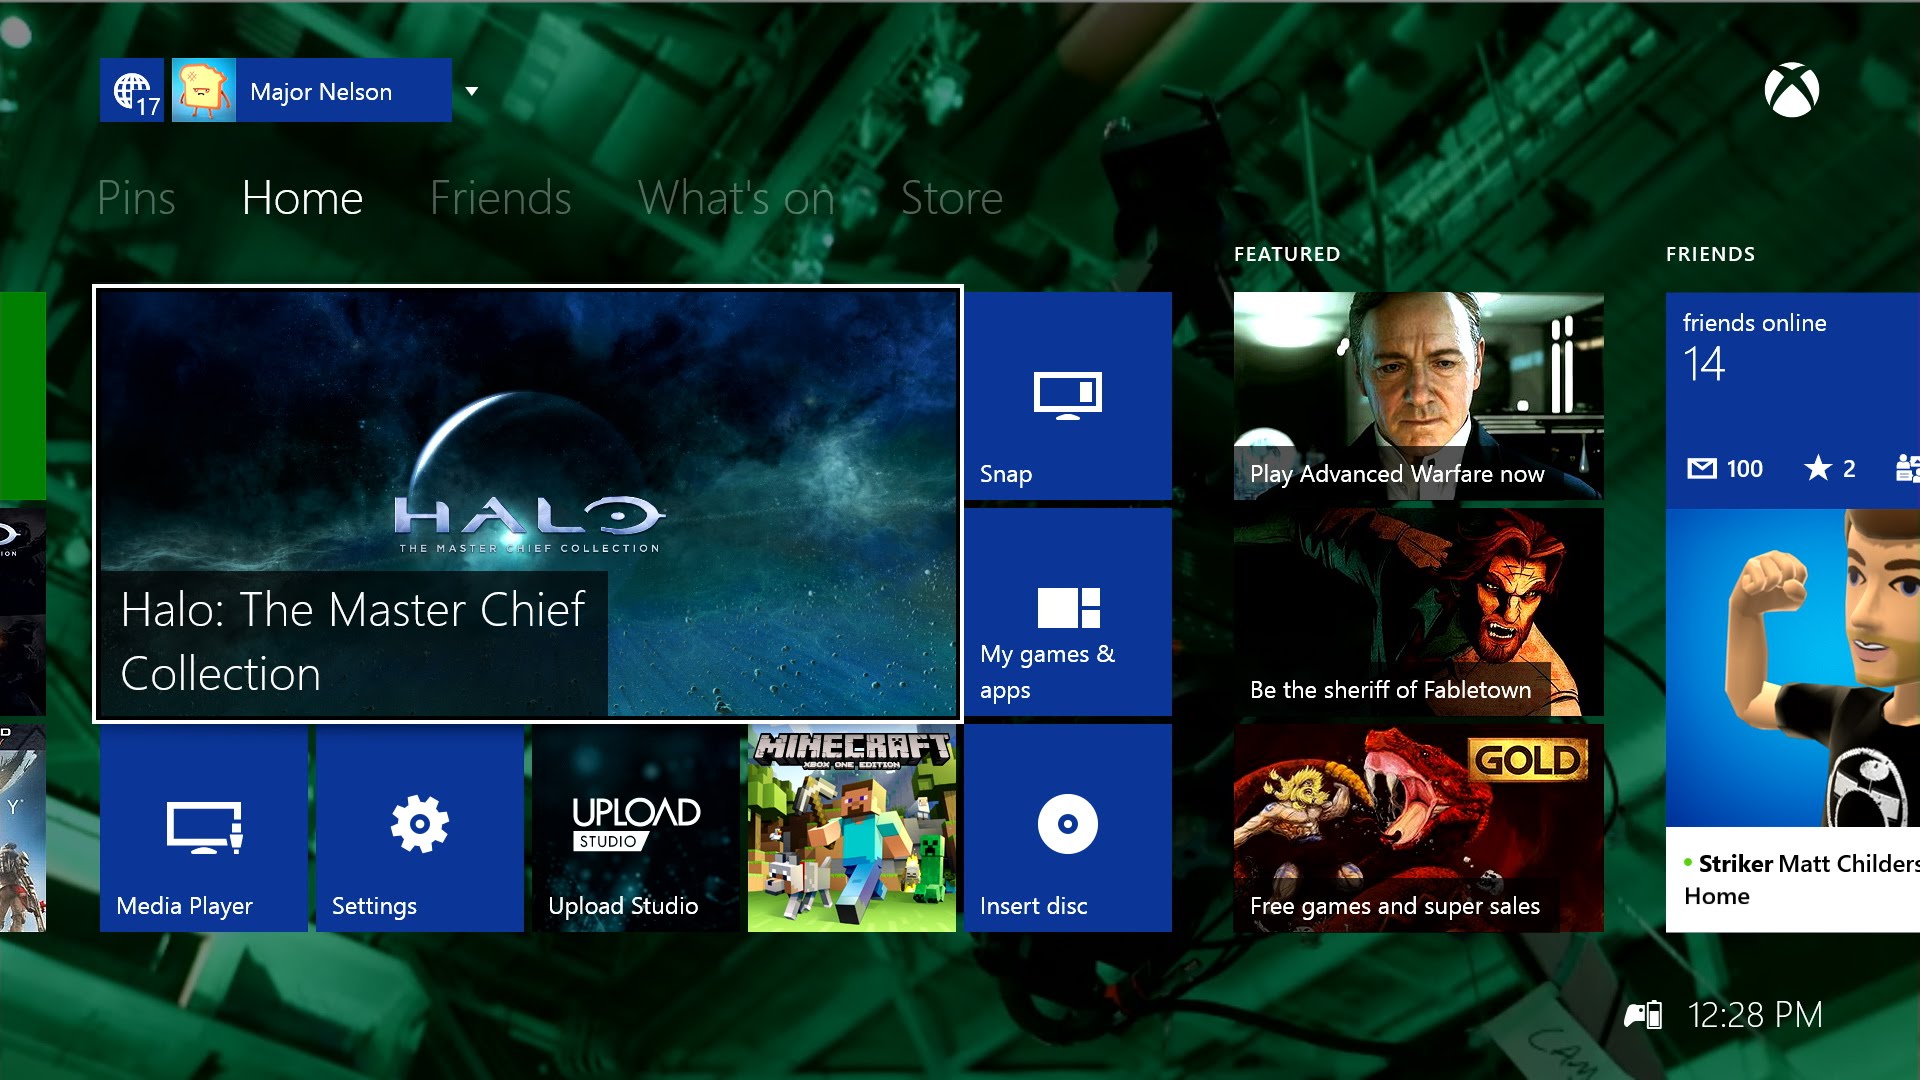 Video For Xbox One November System Update: Personalize and Watch TV Like Never Before